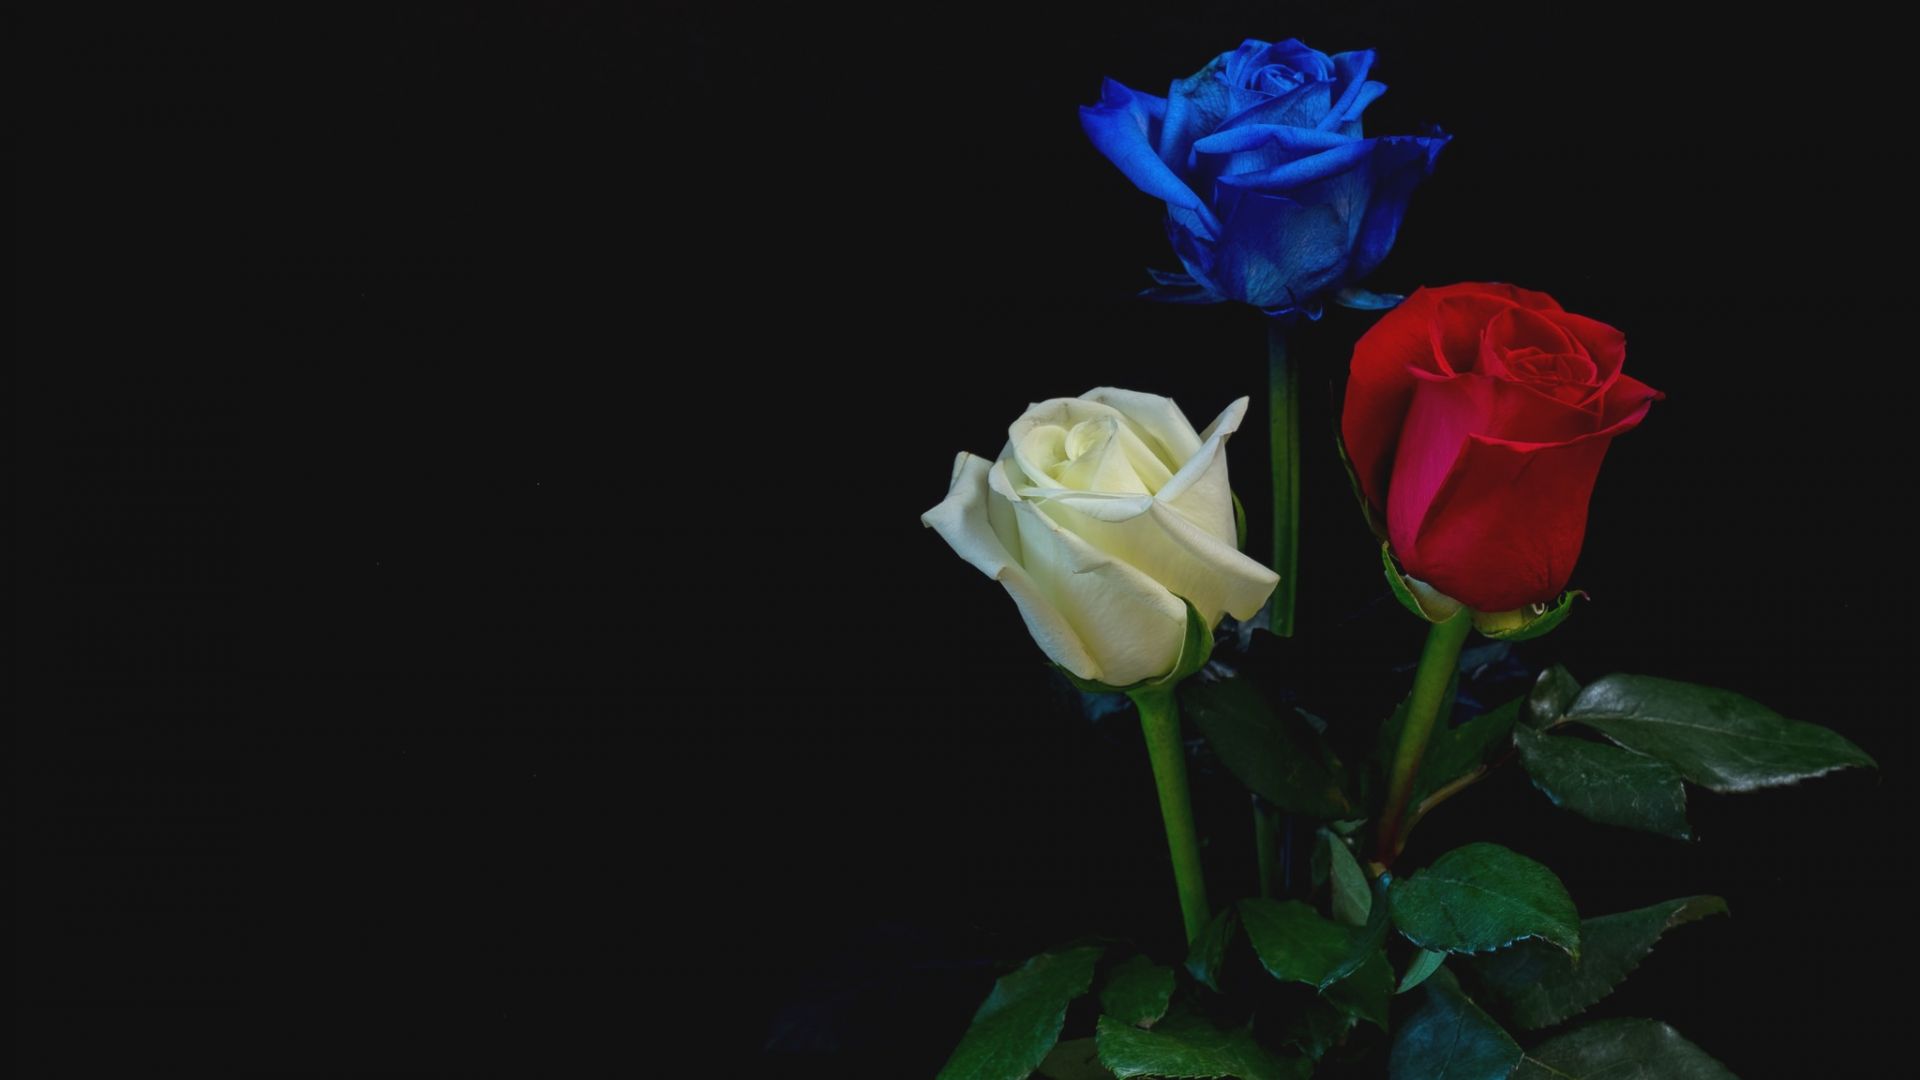 Desktop Wallpaper Blue, Red, White Roses, Flowers, HD Image, Picture, Background, C33a1b